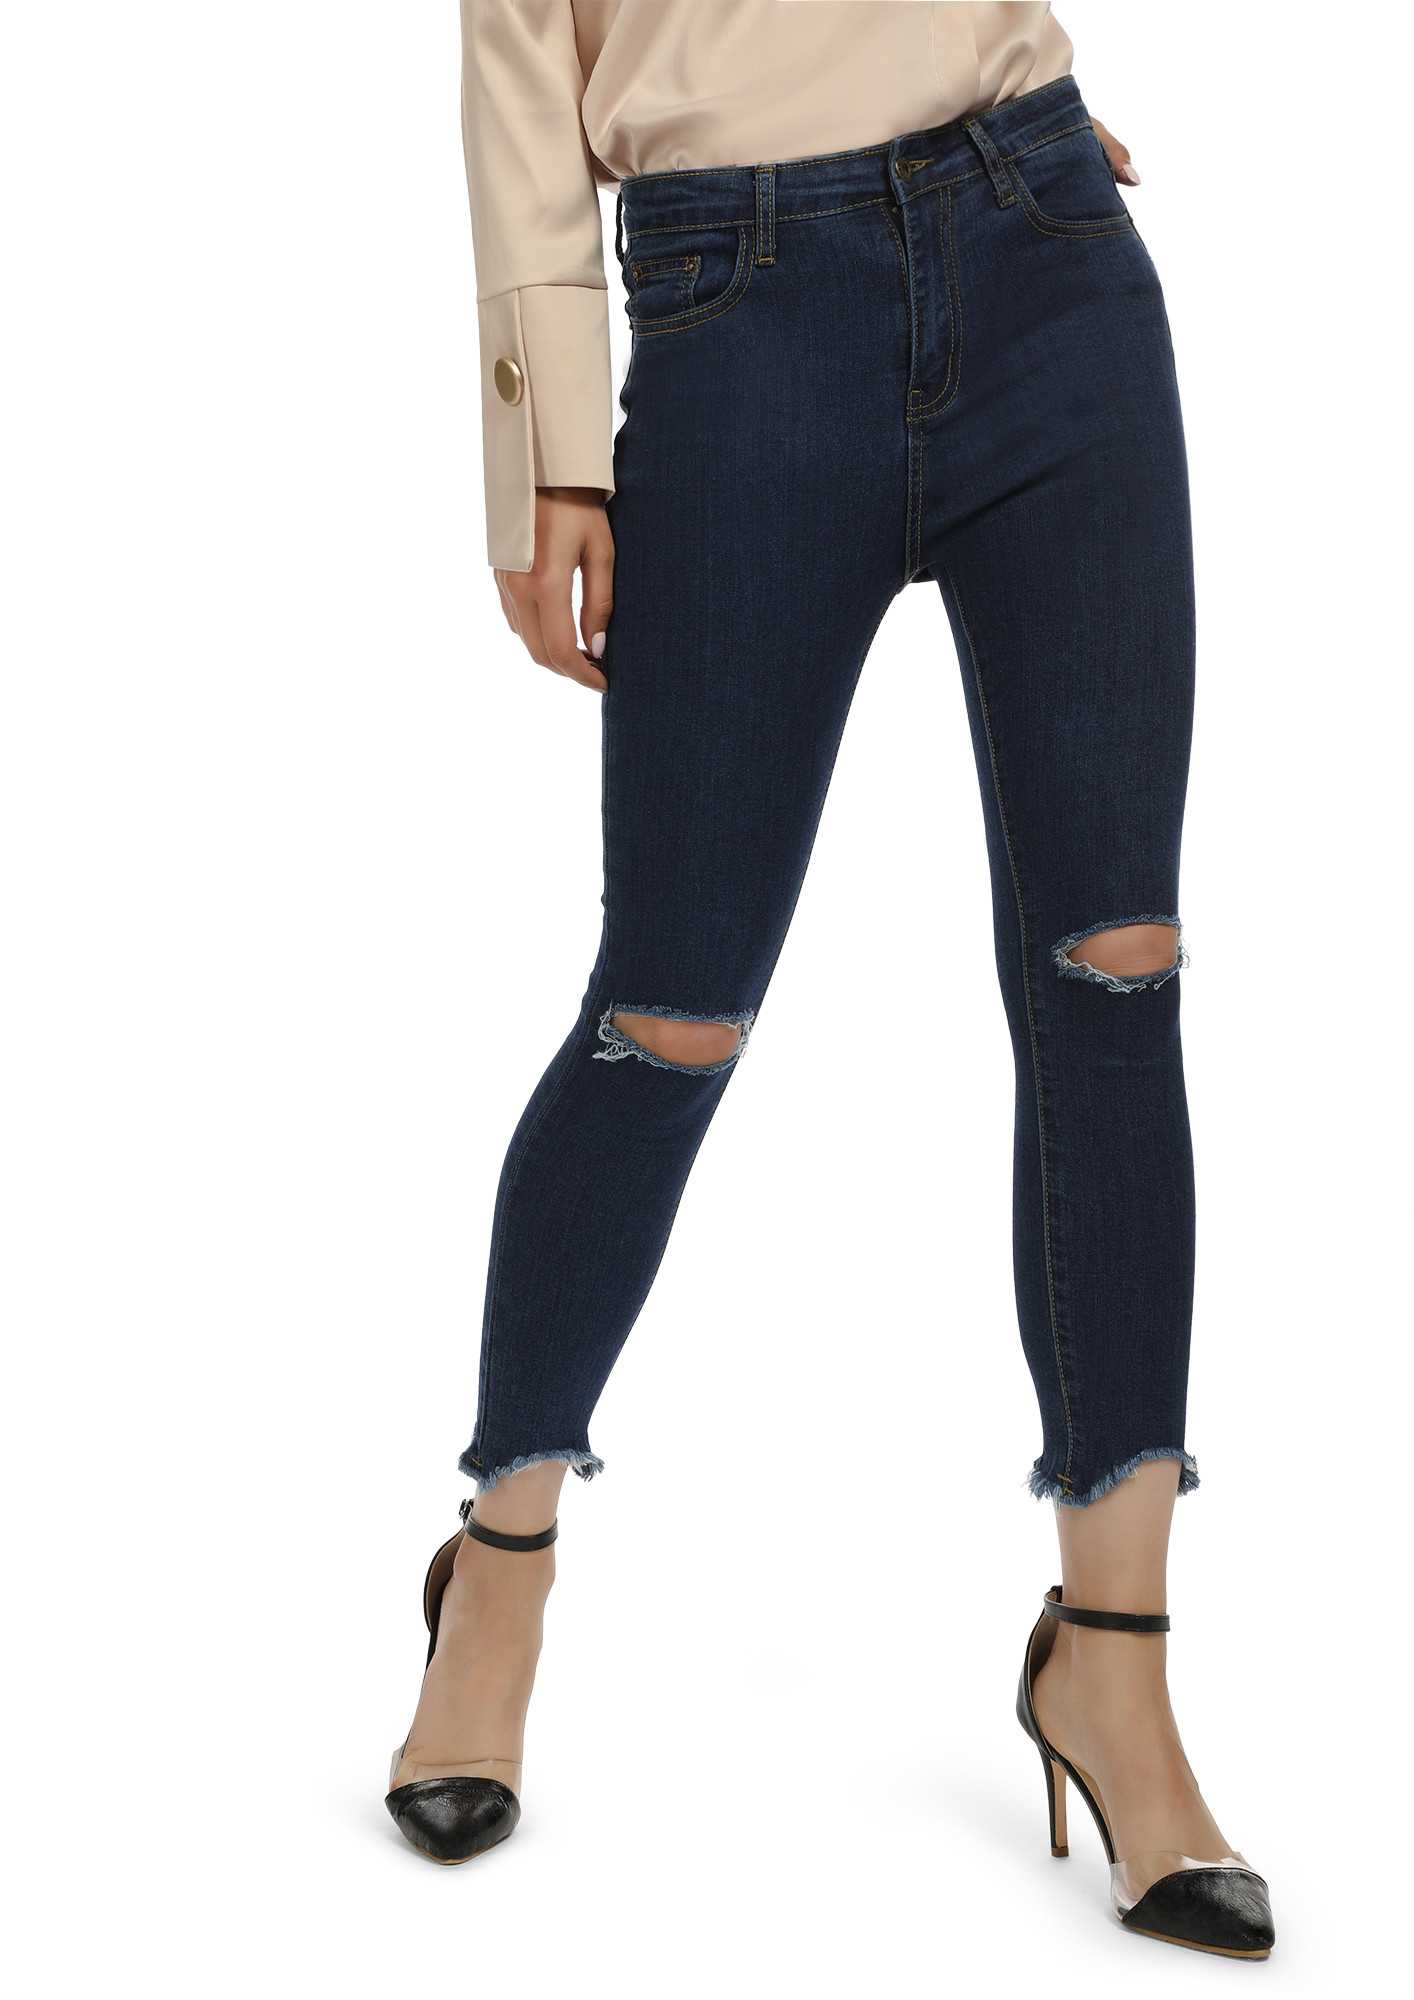 RAW BOTTOMS BLUE CROPPED JEANS